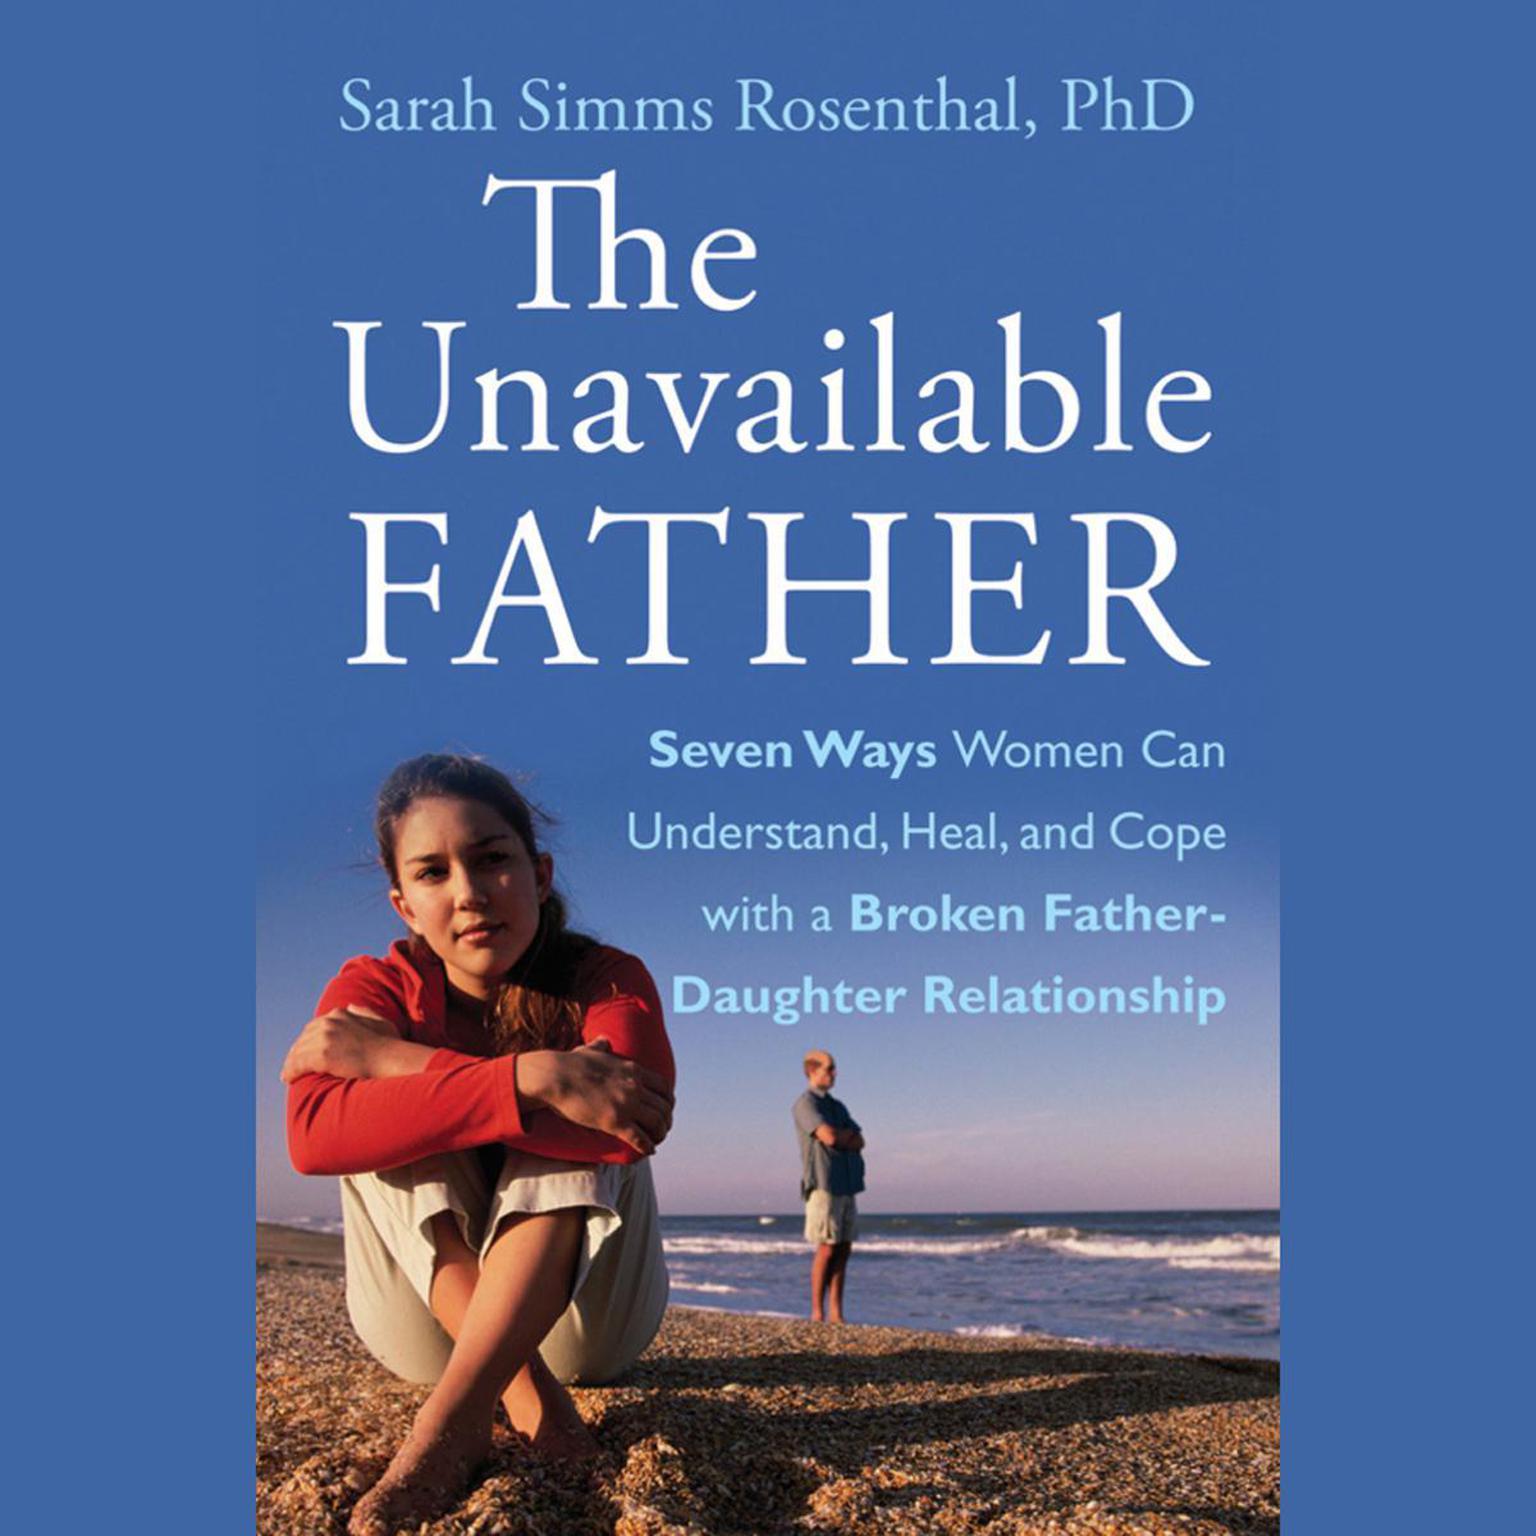 The Unavailable Father: Seven Ways Women Can Understand, Heal, and Cope with a Broken Father-Daughter Relationship Audiobook, by Sarah S. Rosenthal